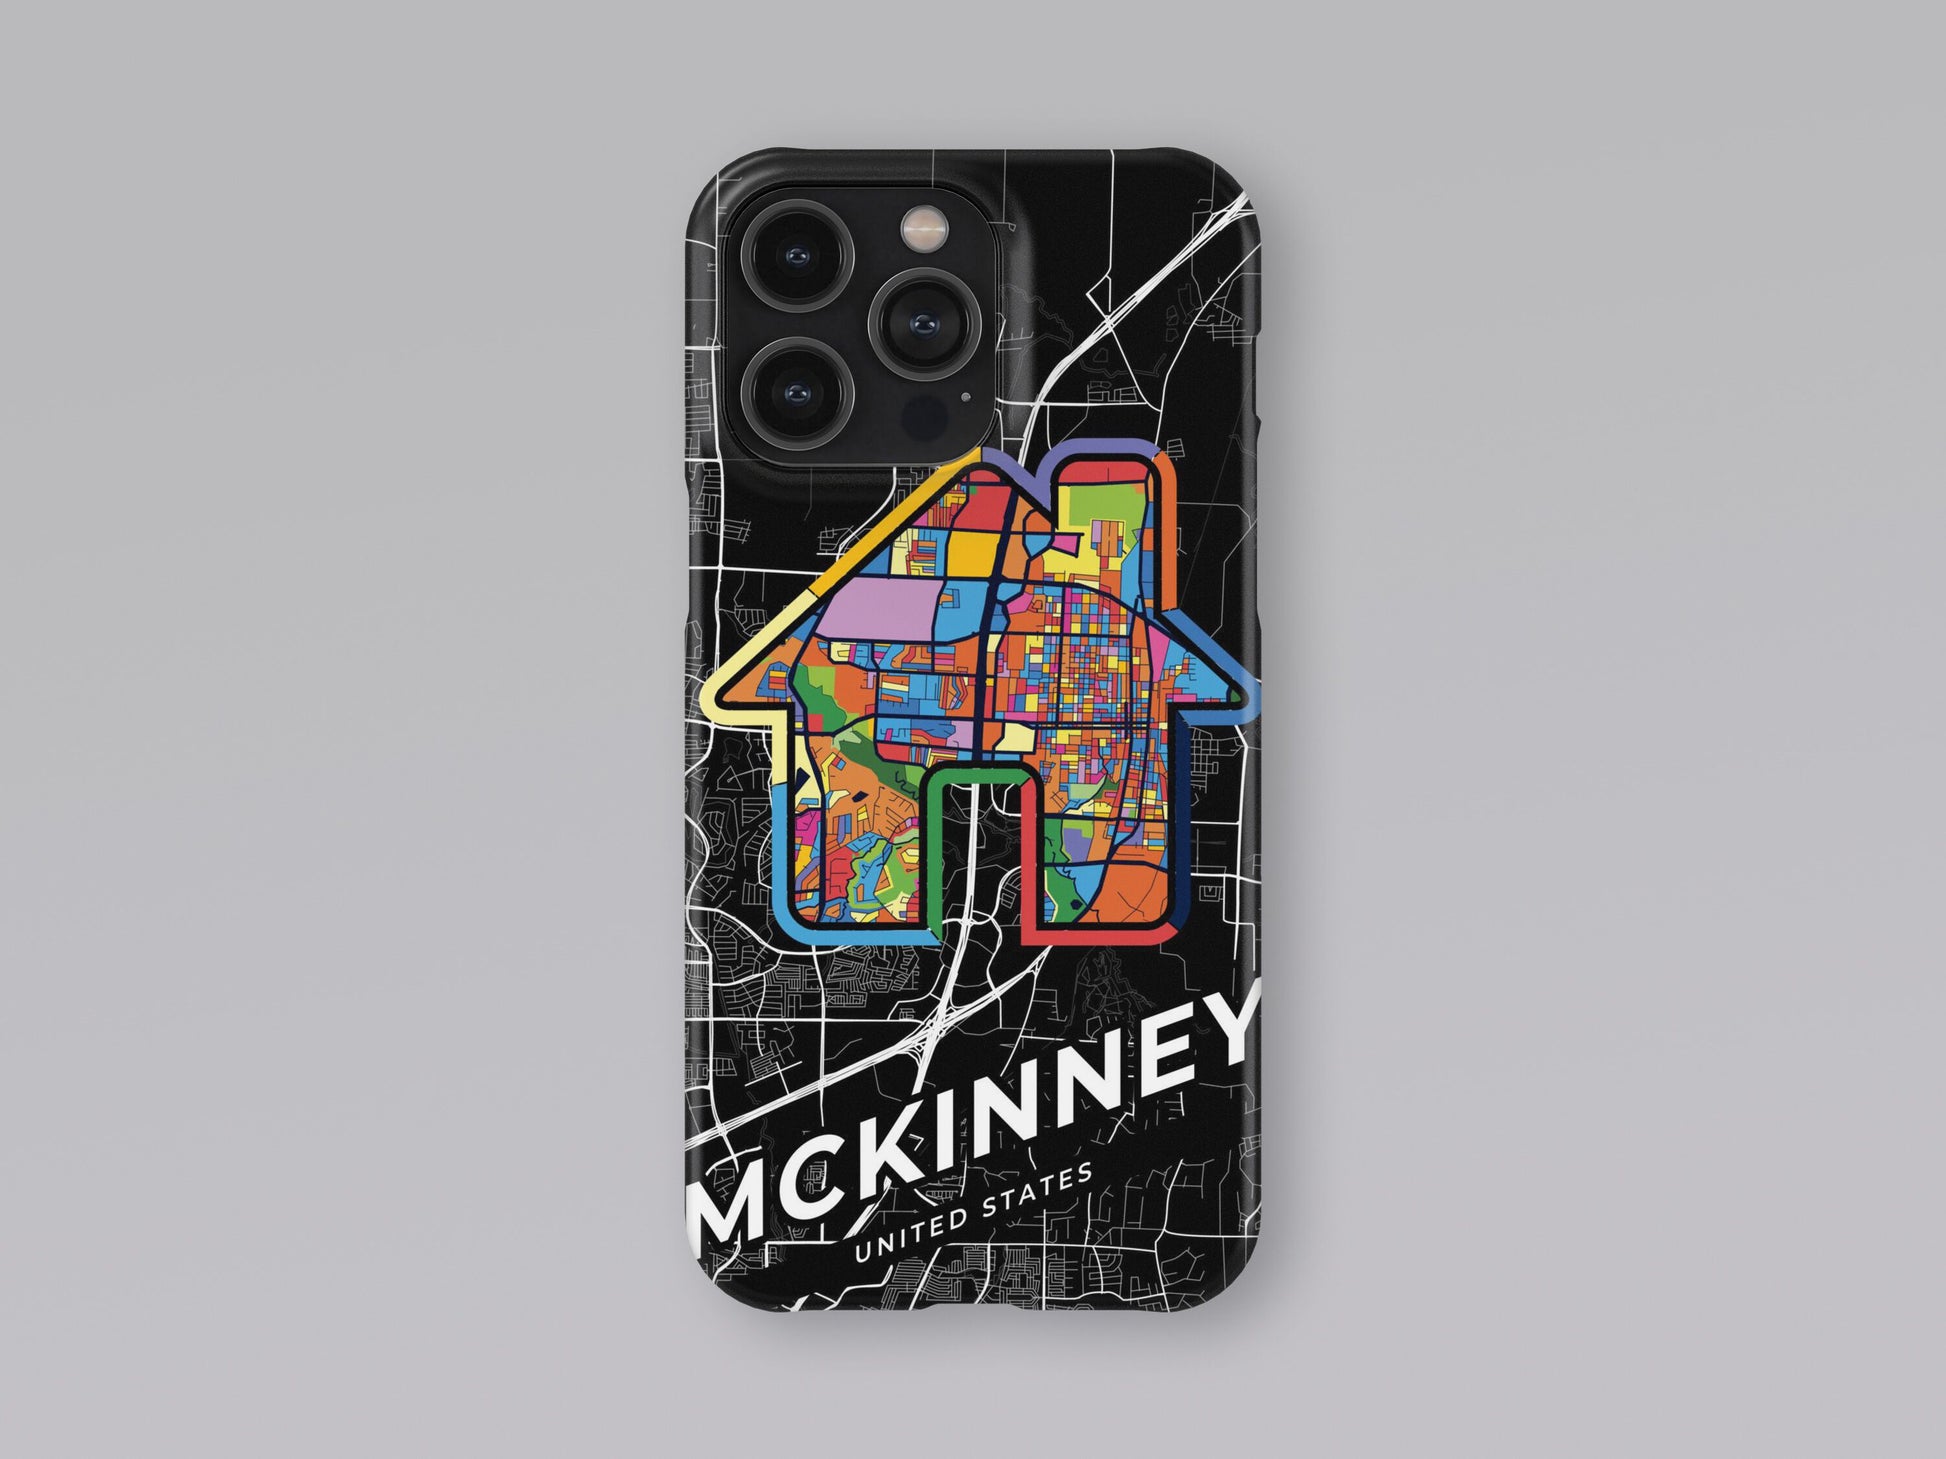 Mckinney Texas slim phone case with colorful icon. Birthday, wedding or housewarming gift. Couple match cases. 3